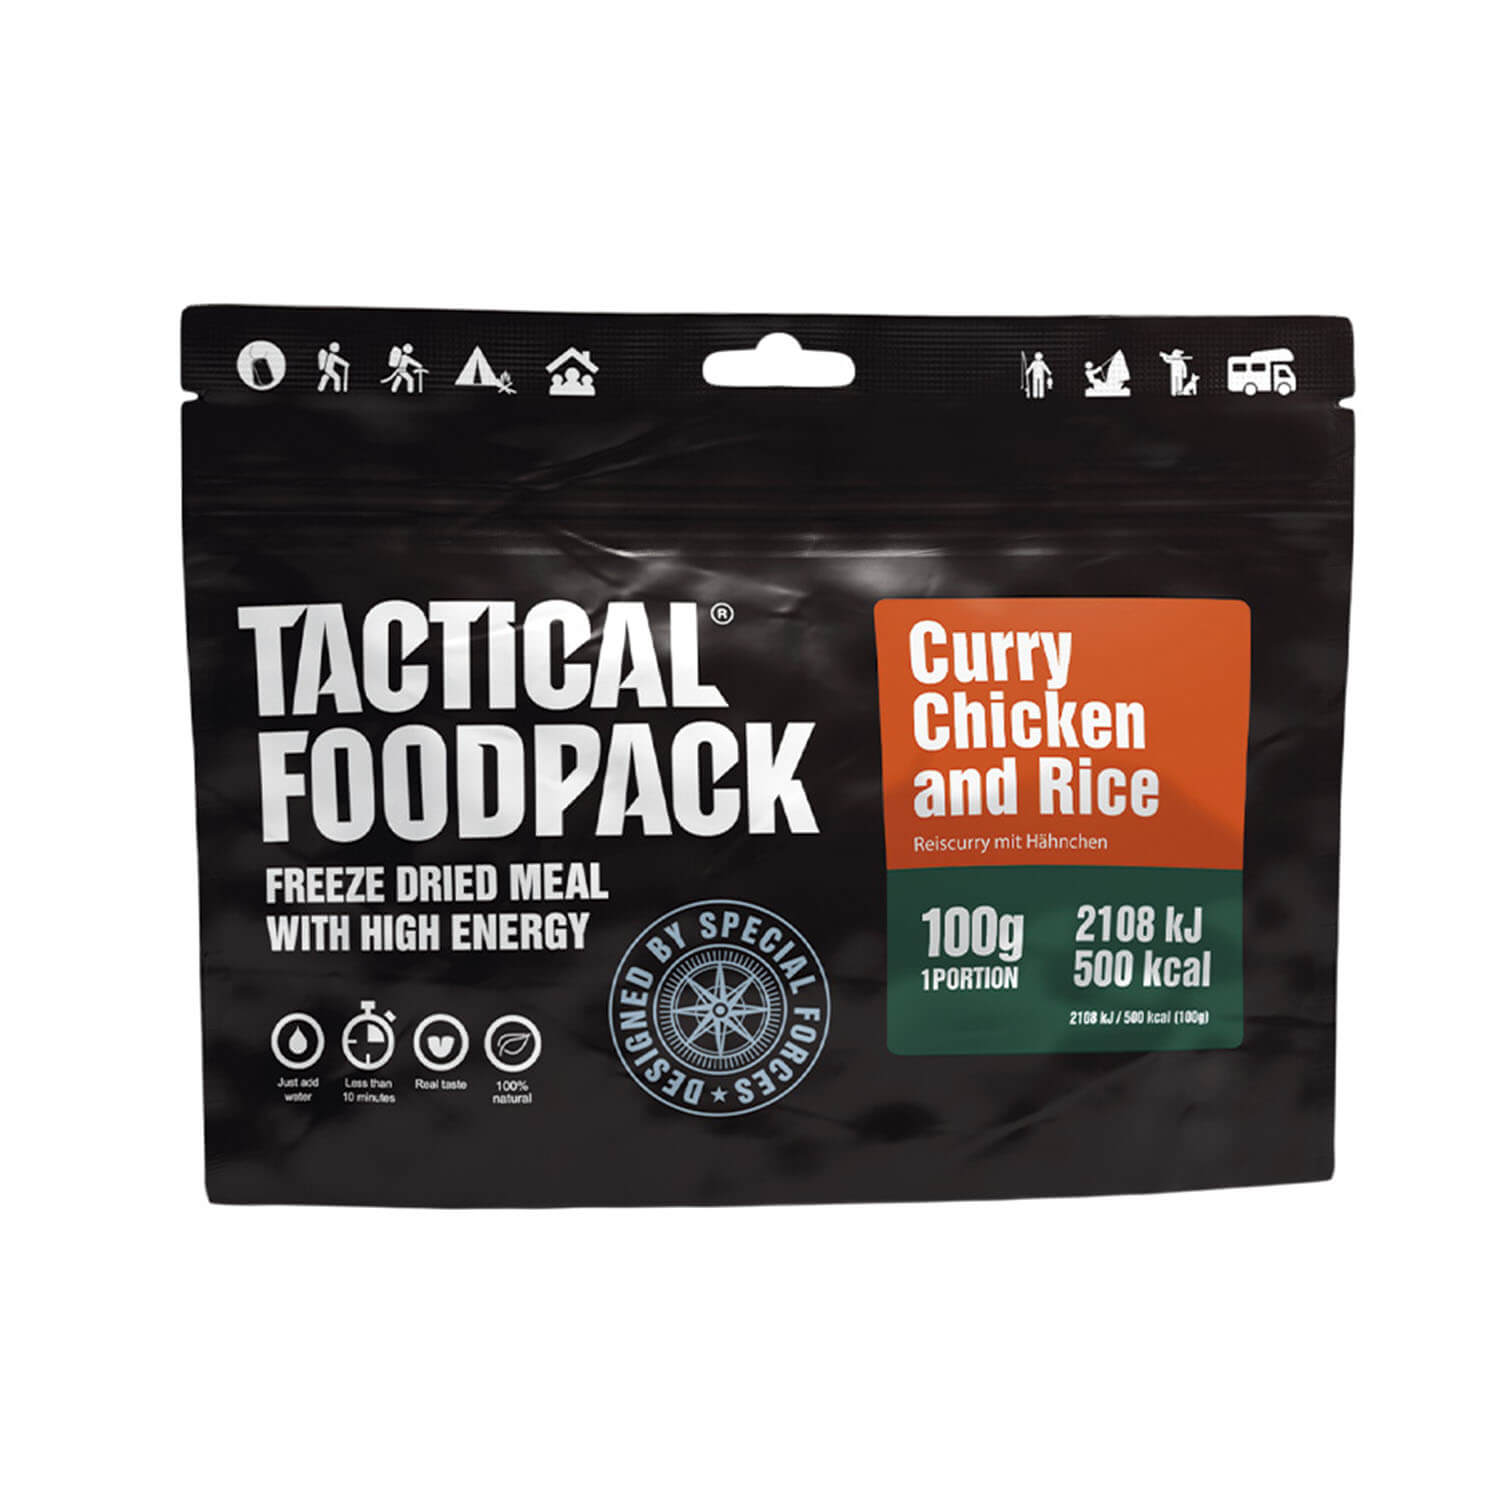 Tactical Foodpack Curry Chicken and Rice - Outdoor Küche